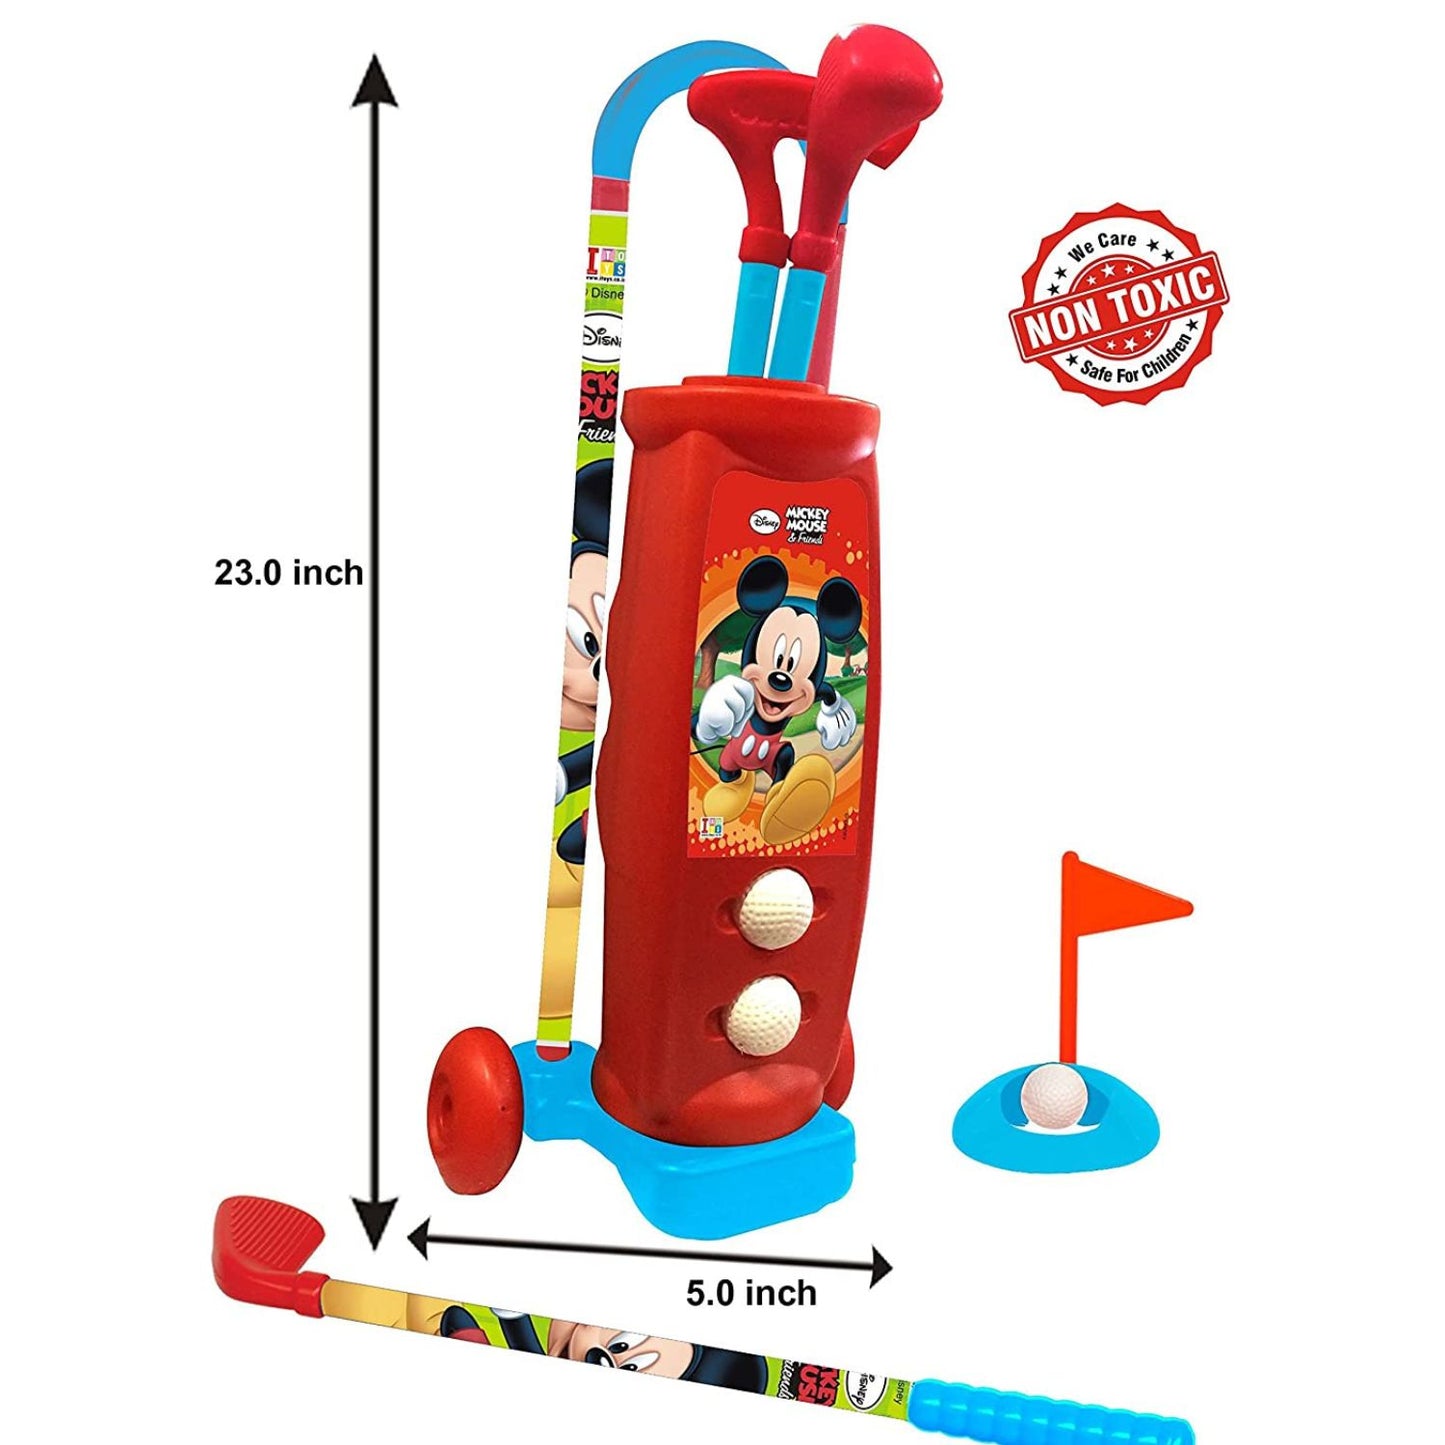 MM TOYS Kids Golf Set - Complete Plastic Golf Kit with Club Holder, 3 Clubs, 2 Balls, and Practice Hole - Ideal for Kids Ages 3-10 - Design May Vary